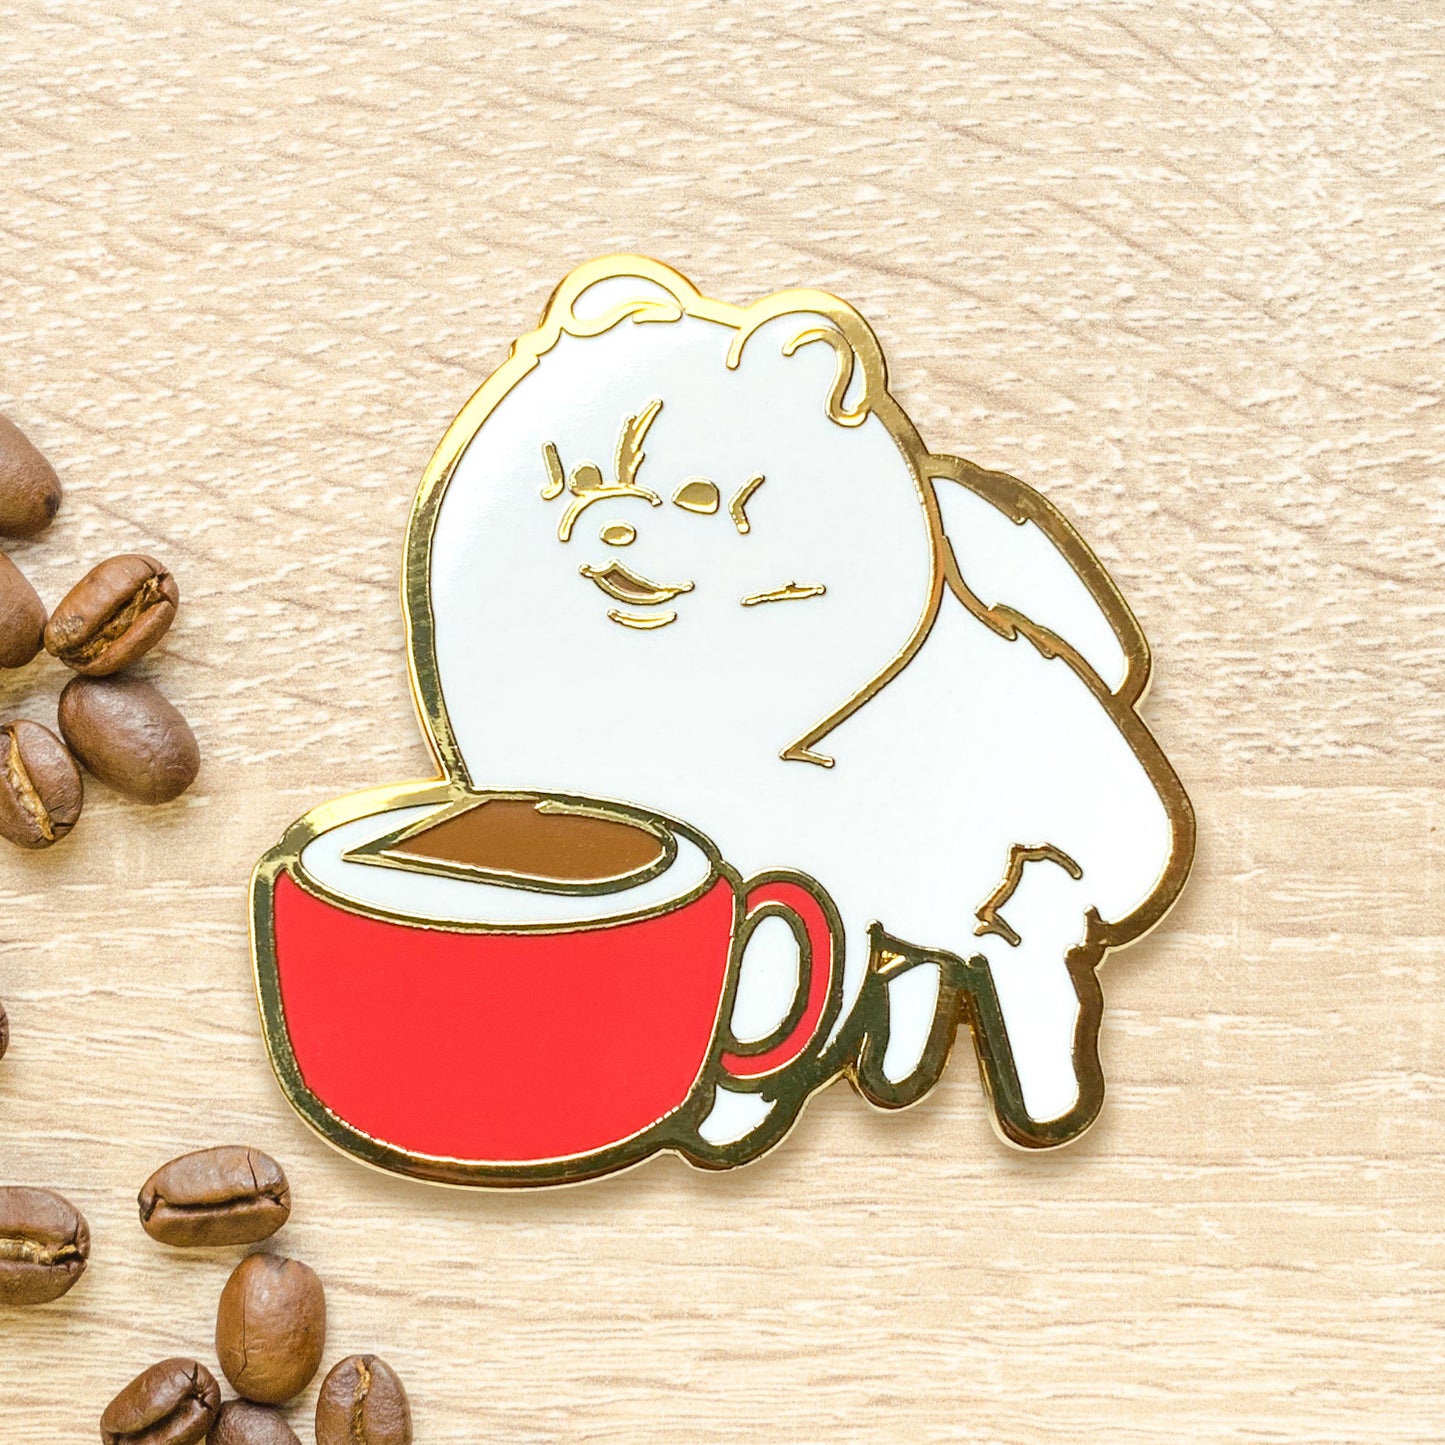 Pomeranian & Cappuccino Coffee Hard Enamel Pin by Cocktail Critters